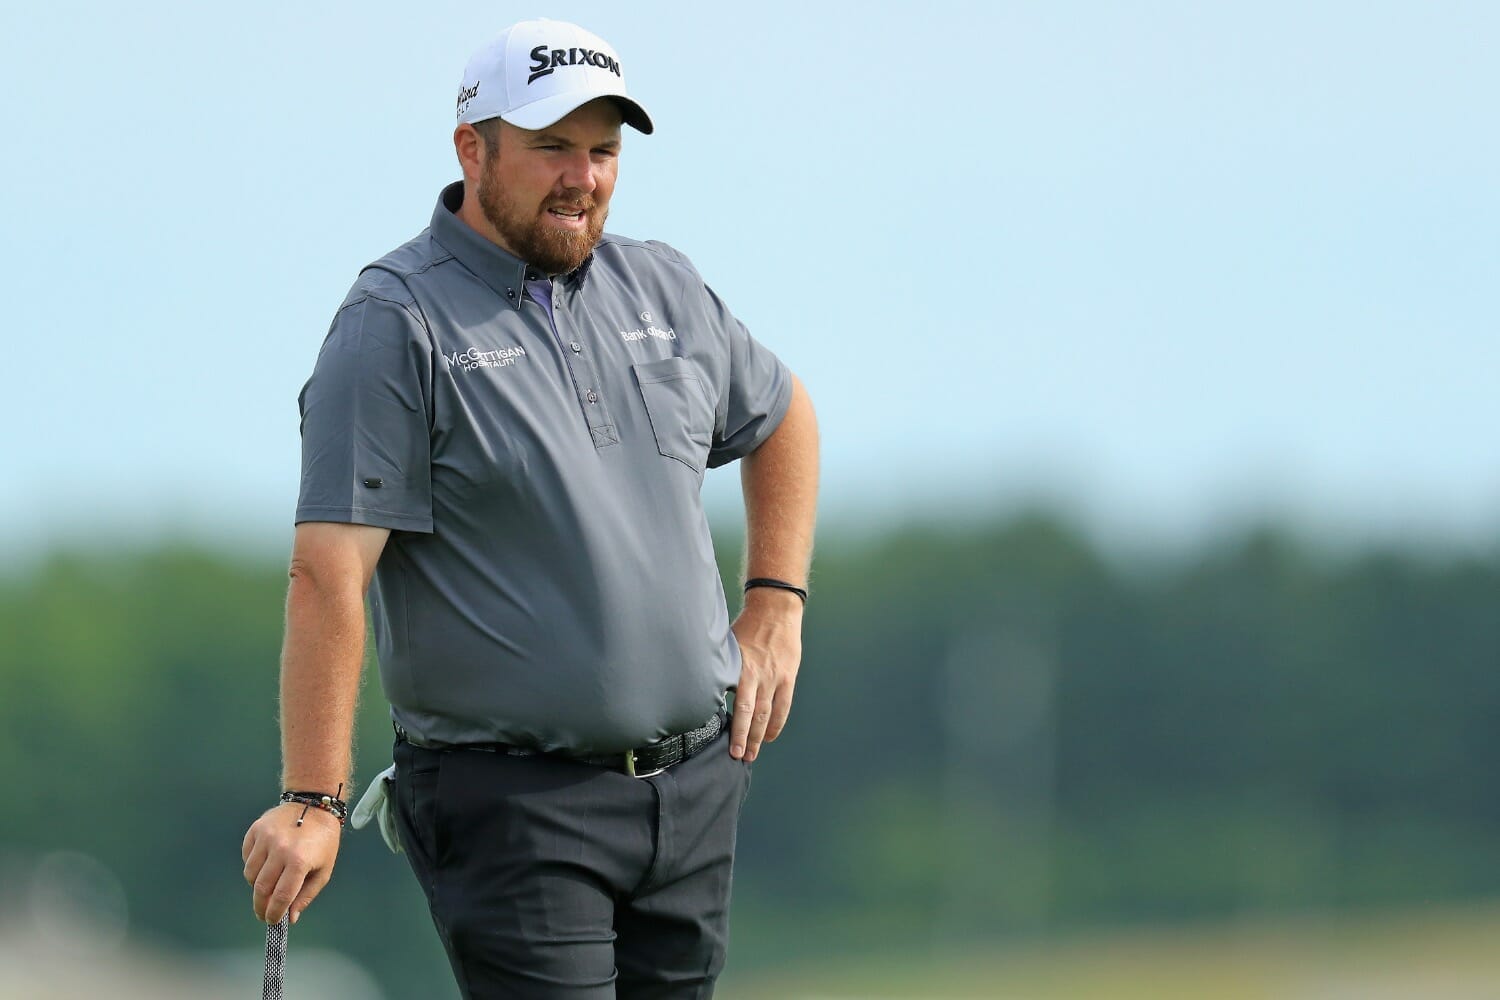 Lowry eyeing final Copperhead pairing with Tiger